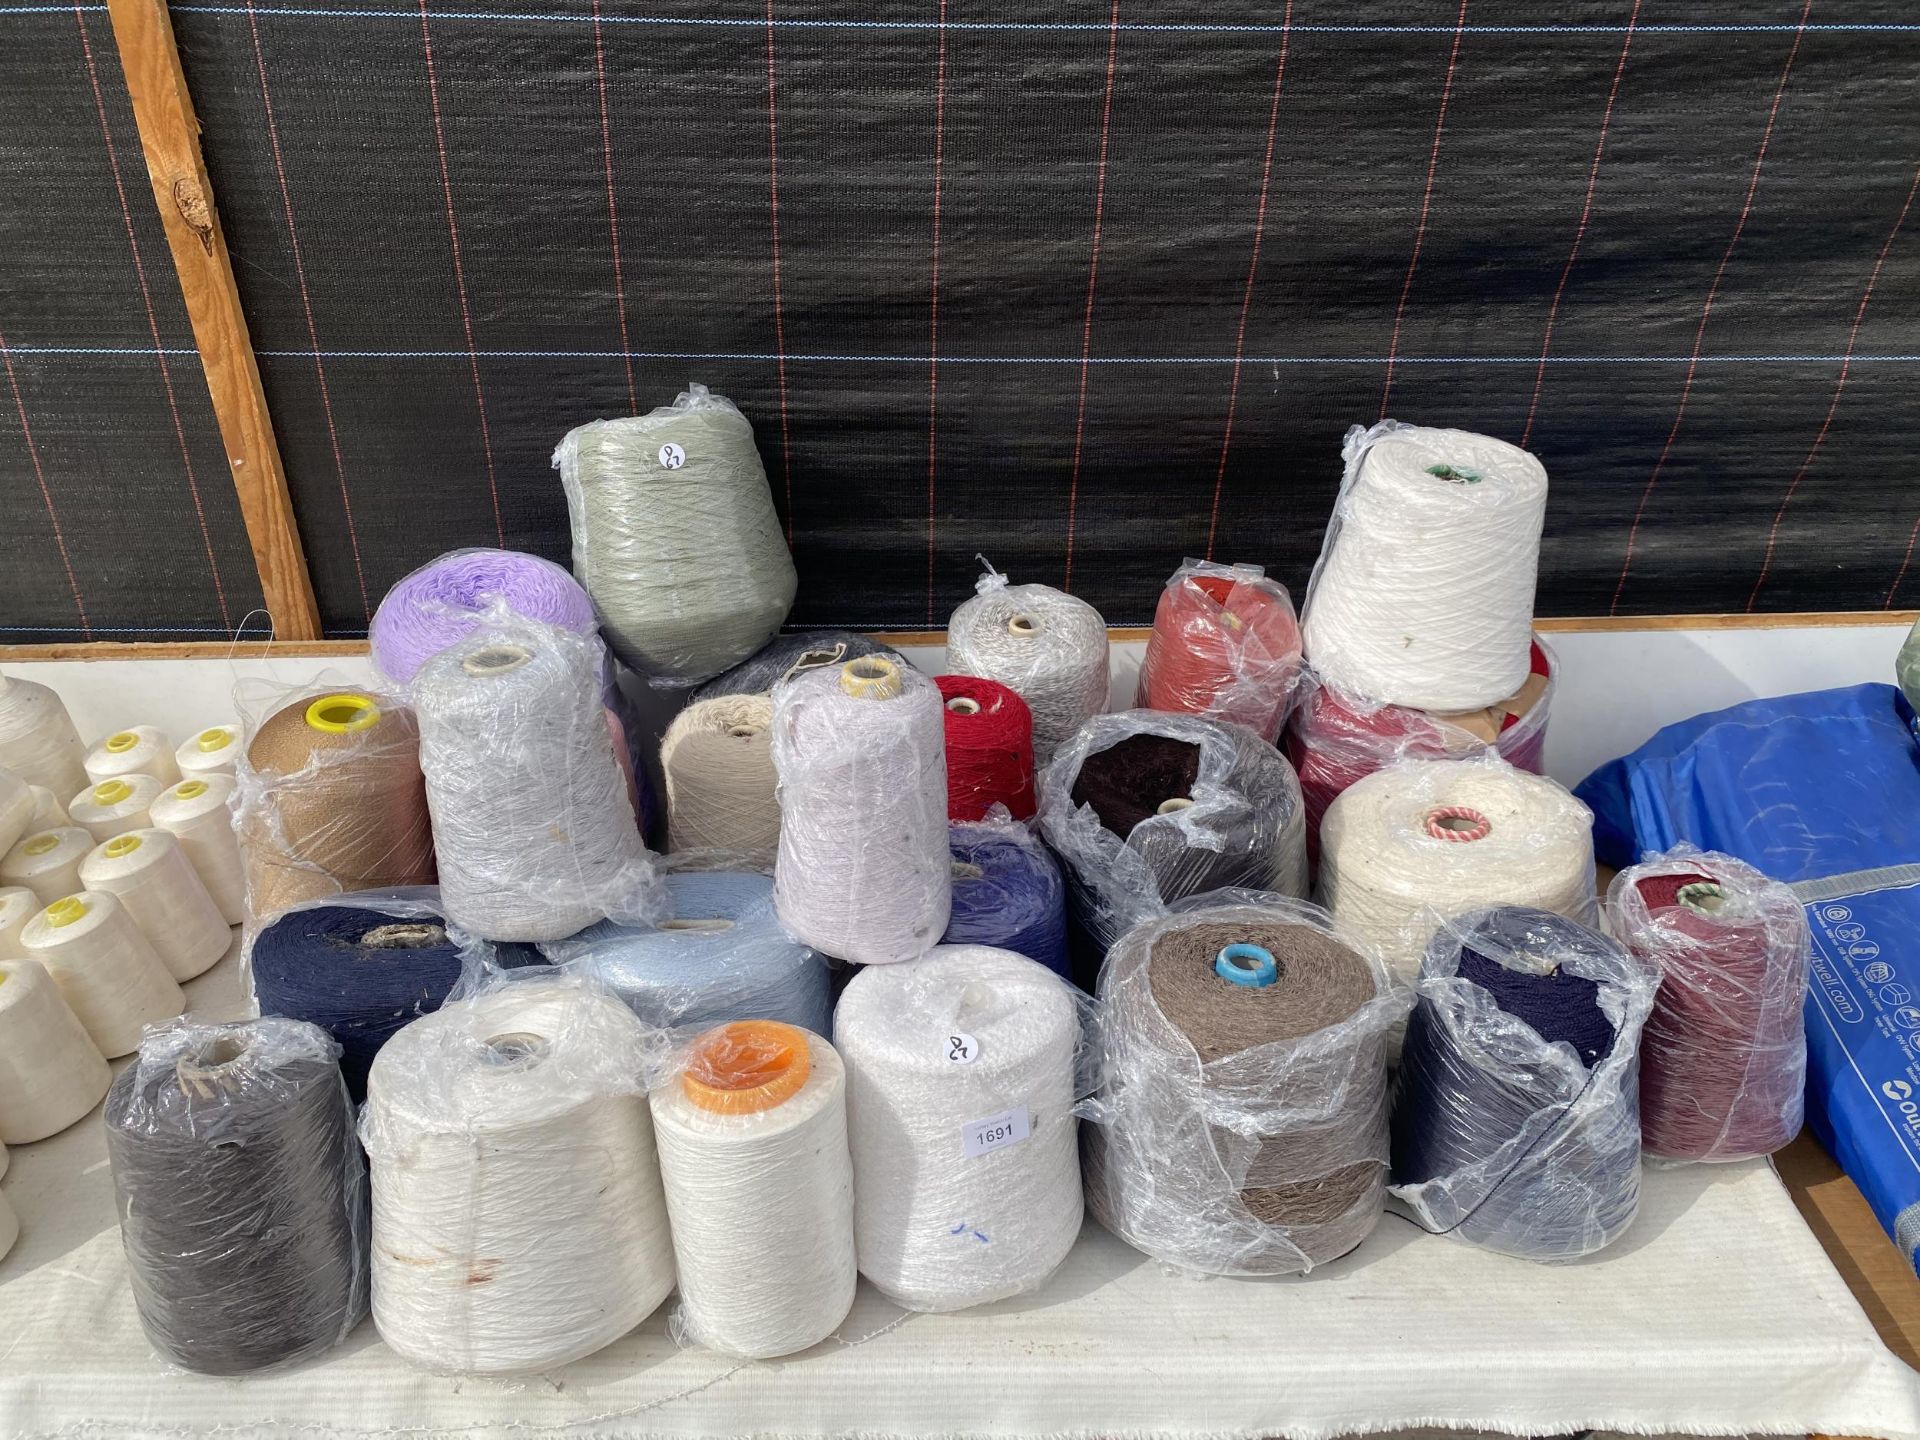 A LARGE QUANTITY OF INDUSTRIAL SEWING MACHINE COTTON